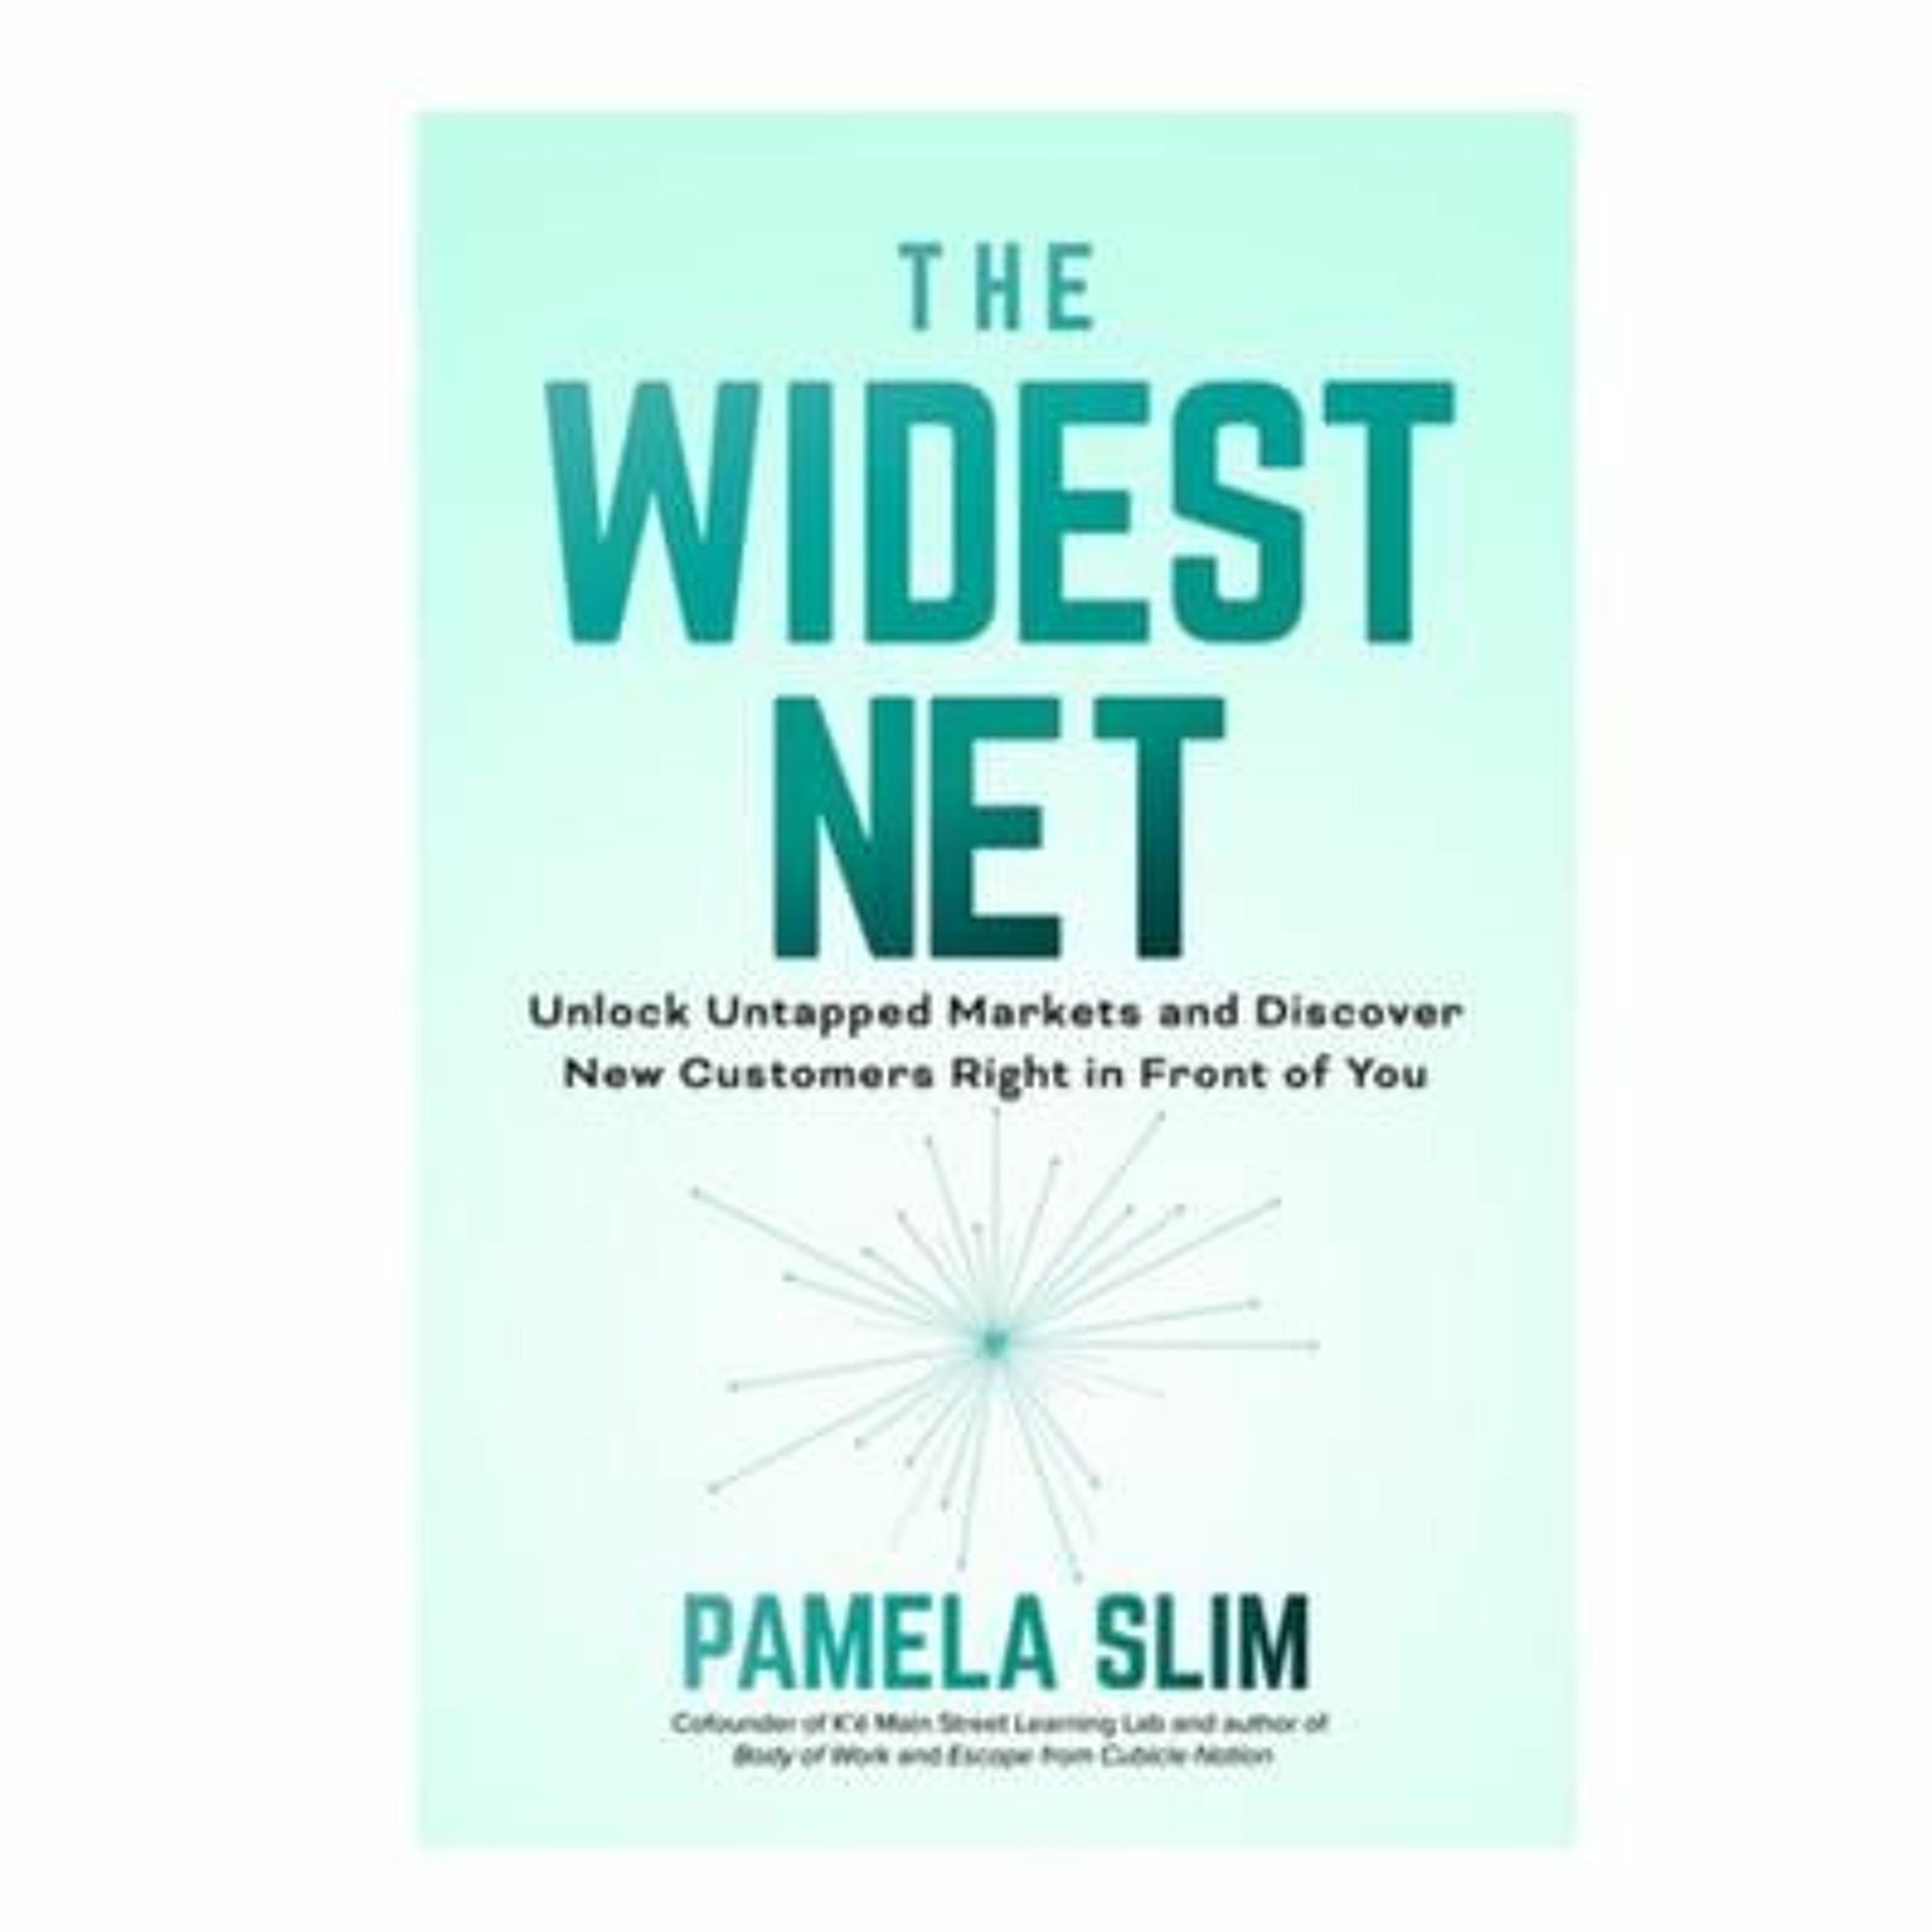 Podcast 949: The Widest Net with Pamela Slim